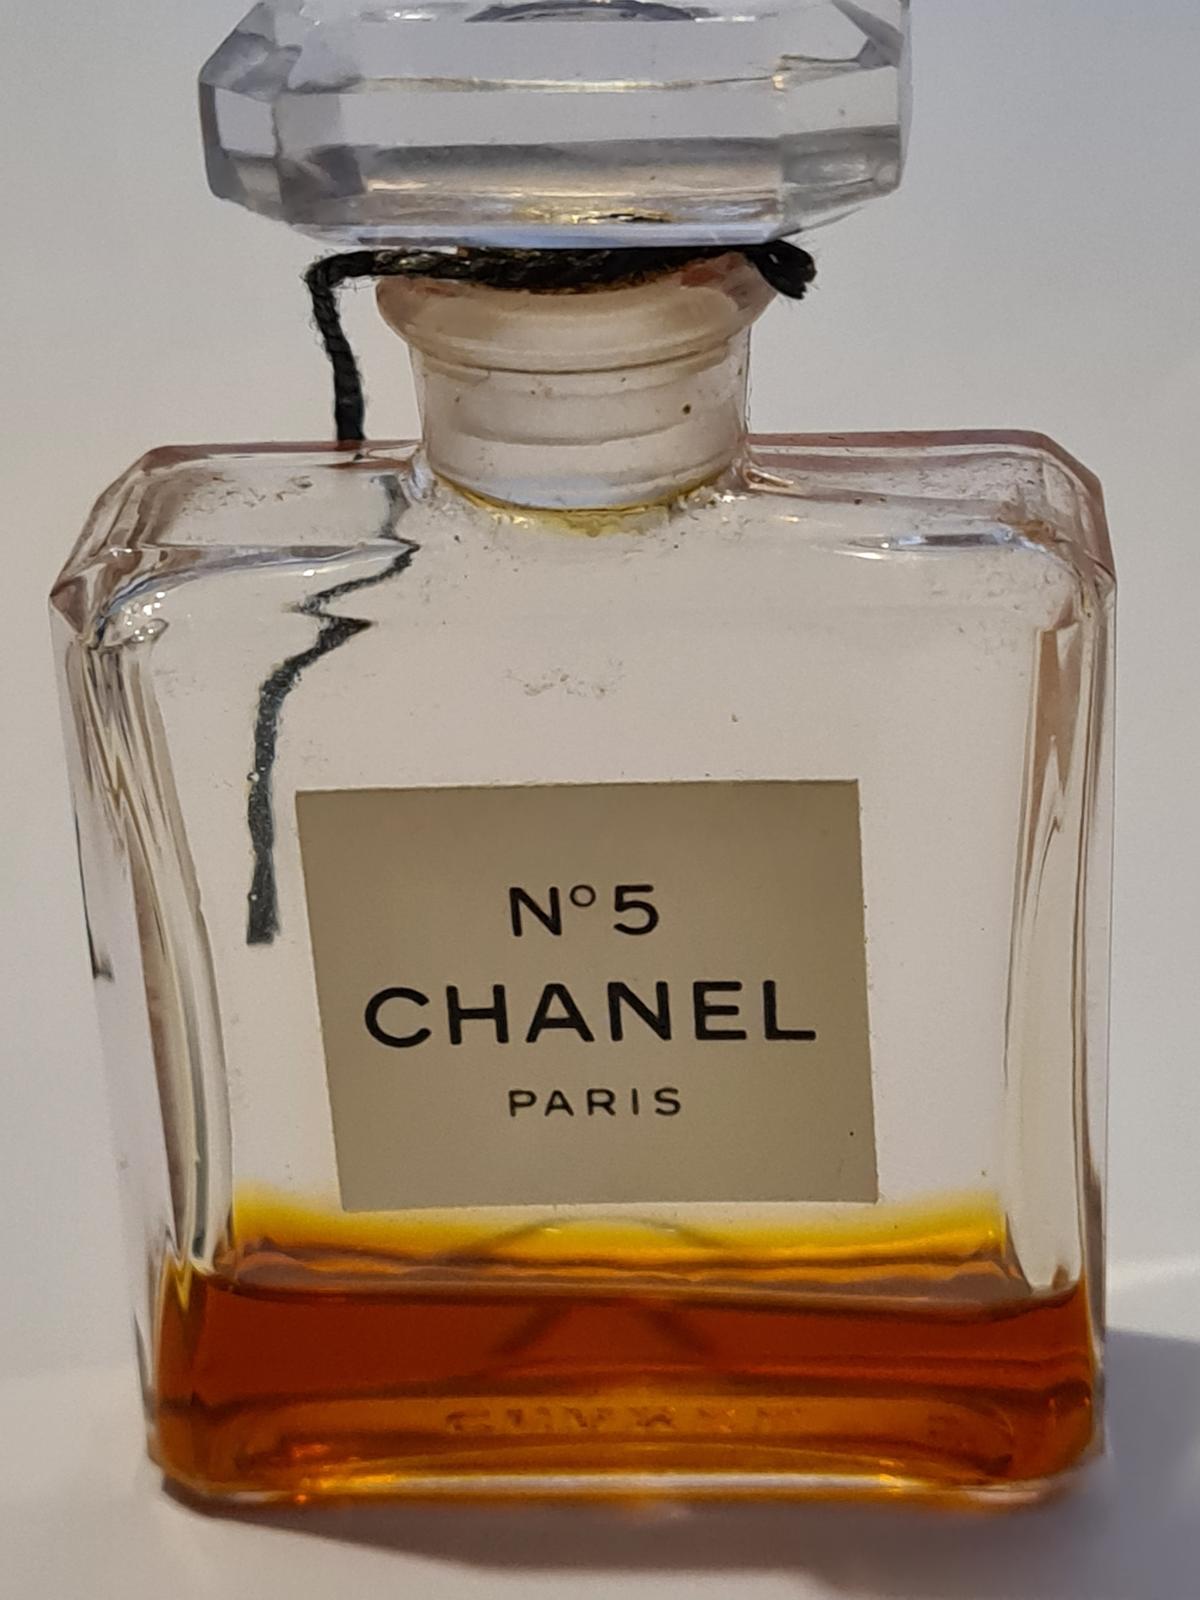 Wondering what year this is from - Chanel No 5 Parfum (Page 1